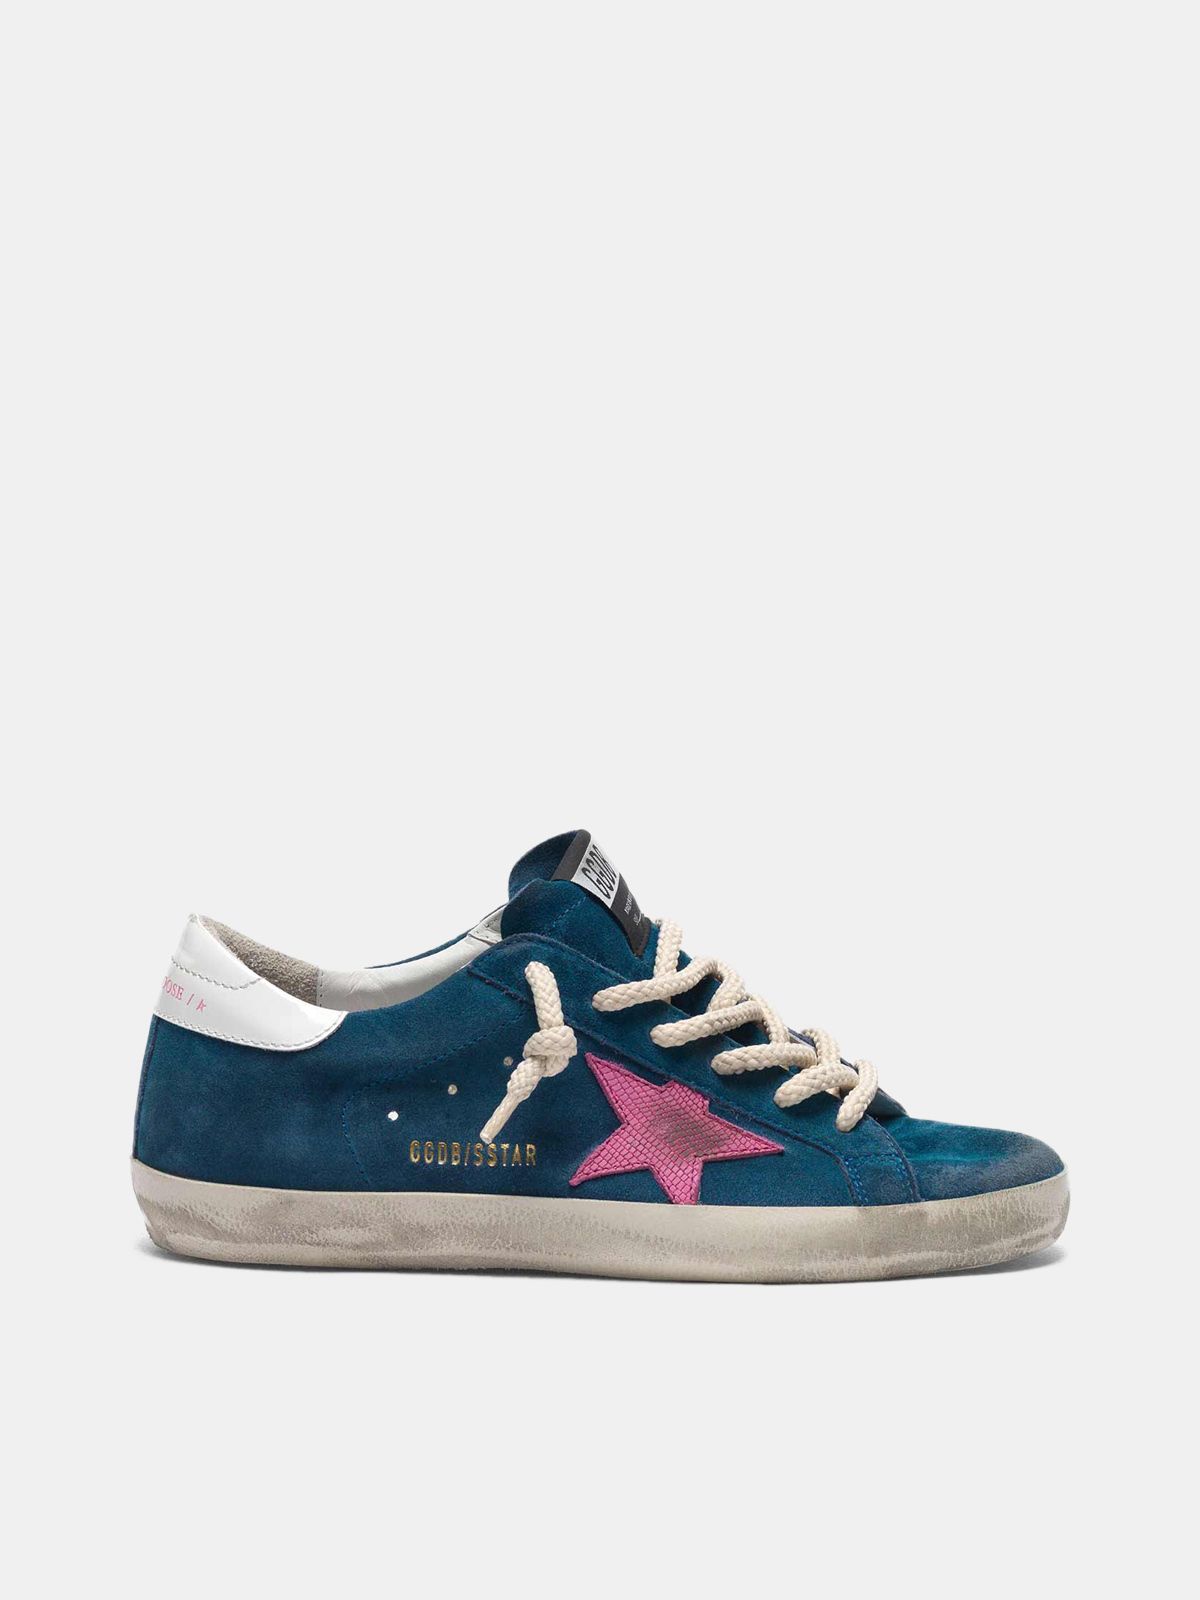 Sneakers Uomo Golden Goose Super-Star sneakers in blue suede with a pink star